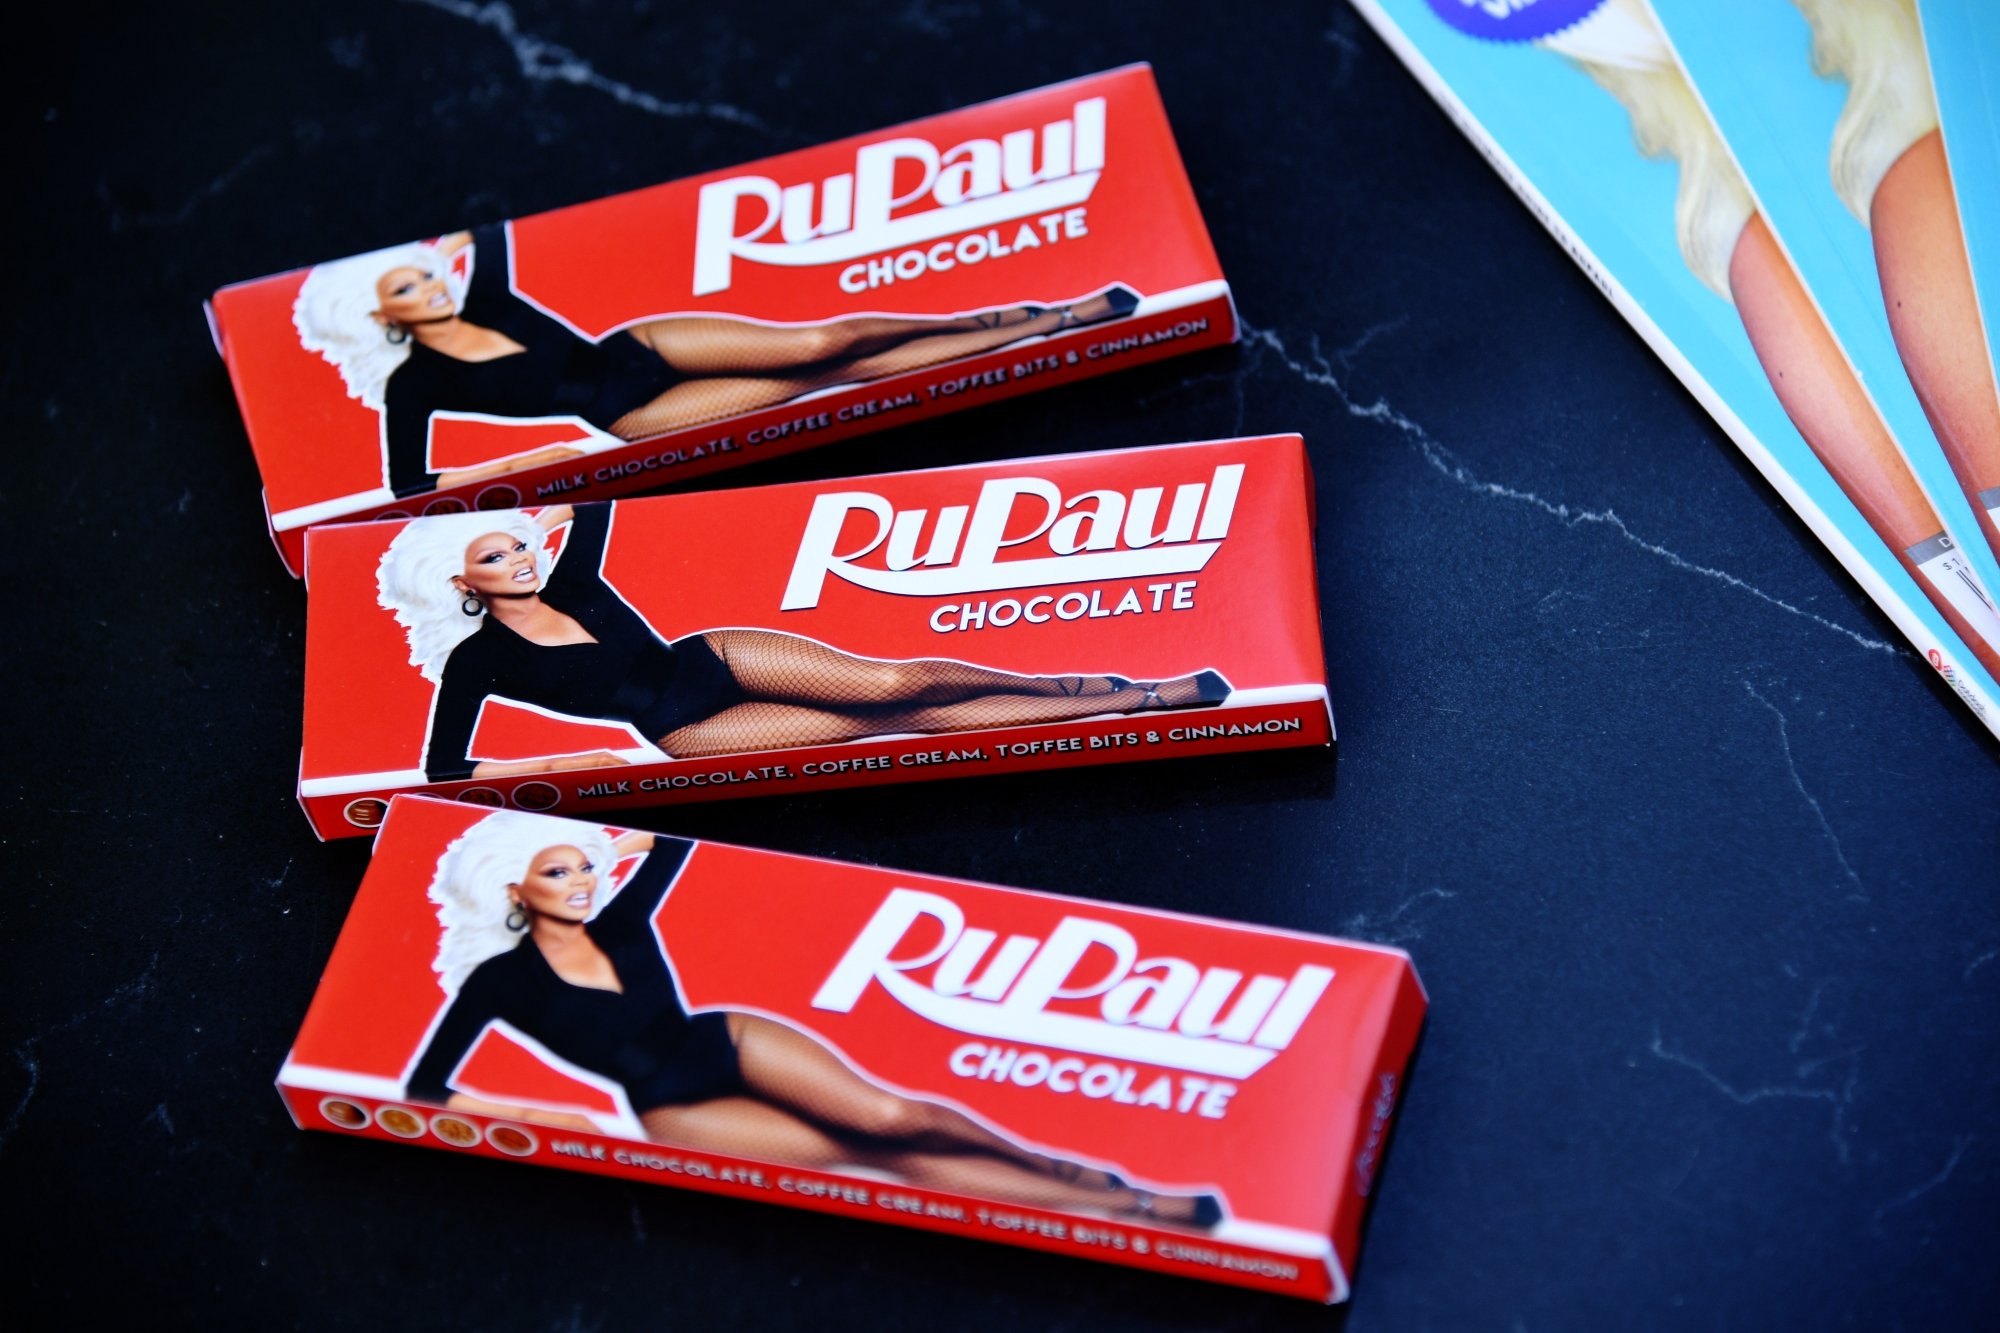 'RuPaul's Drag Race' Season 14 chocolate candy bars. The red wrappers have an image of RuPaul laying on her side.